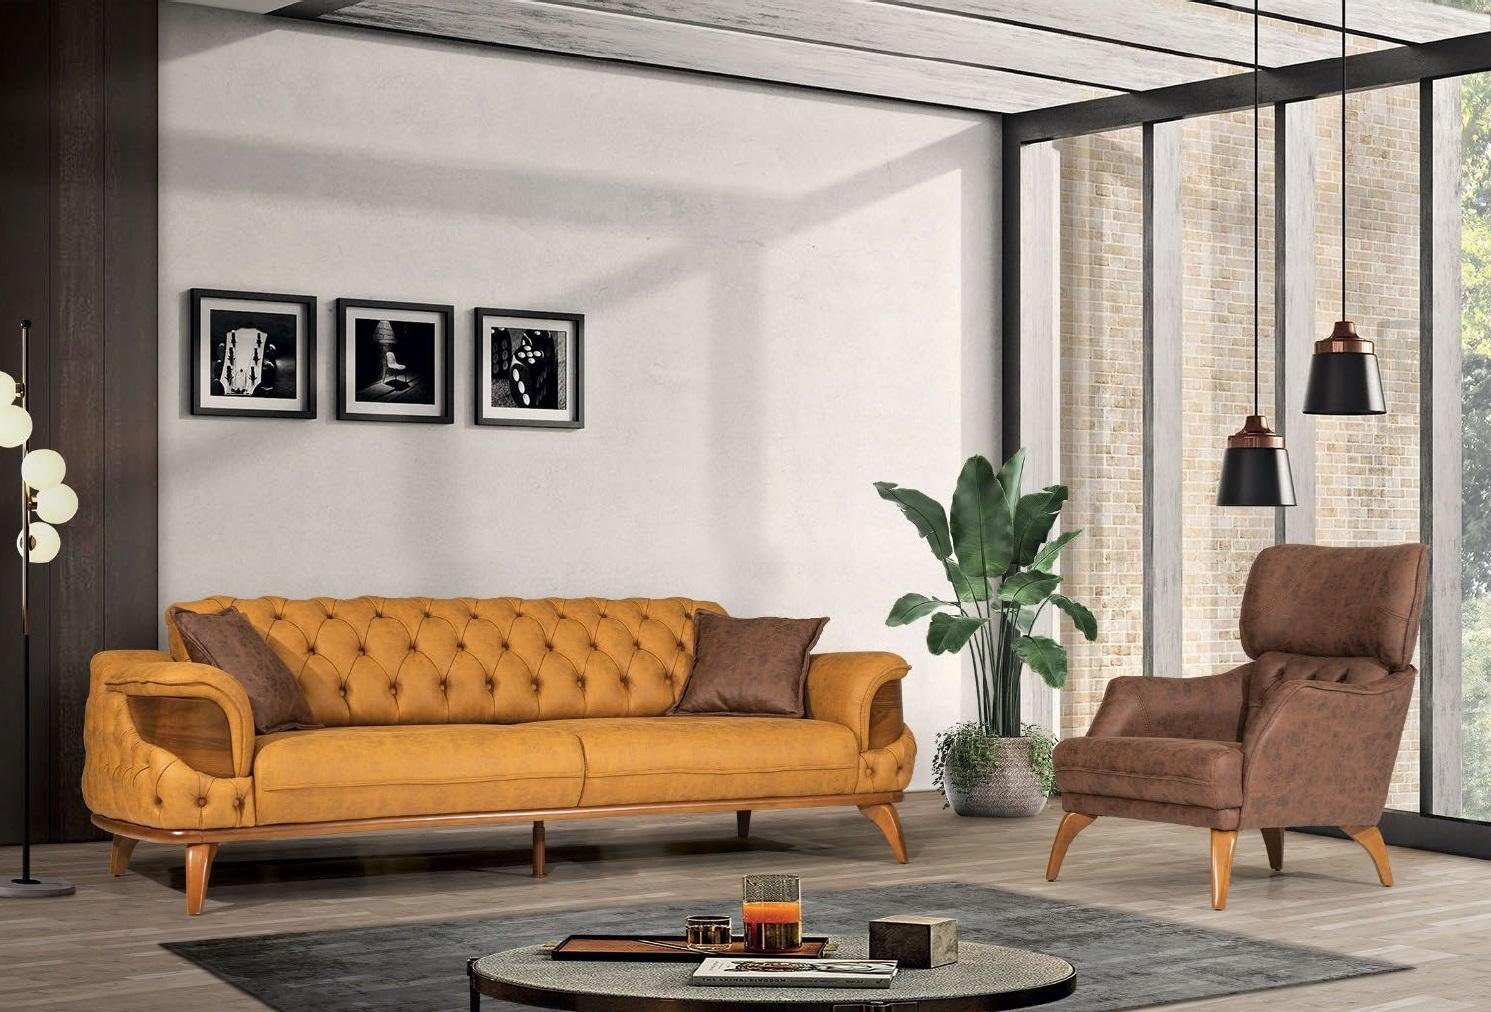 JVmoebel Sofa Dreisitzer Sofa Leder Made Luxus in Couches Chesterfield Western, Europe Couch Sofas